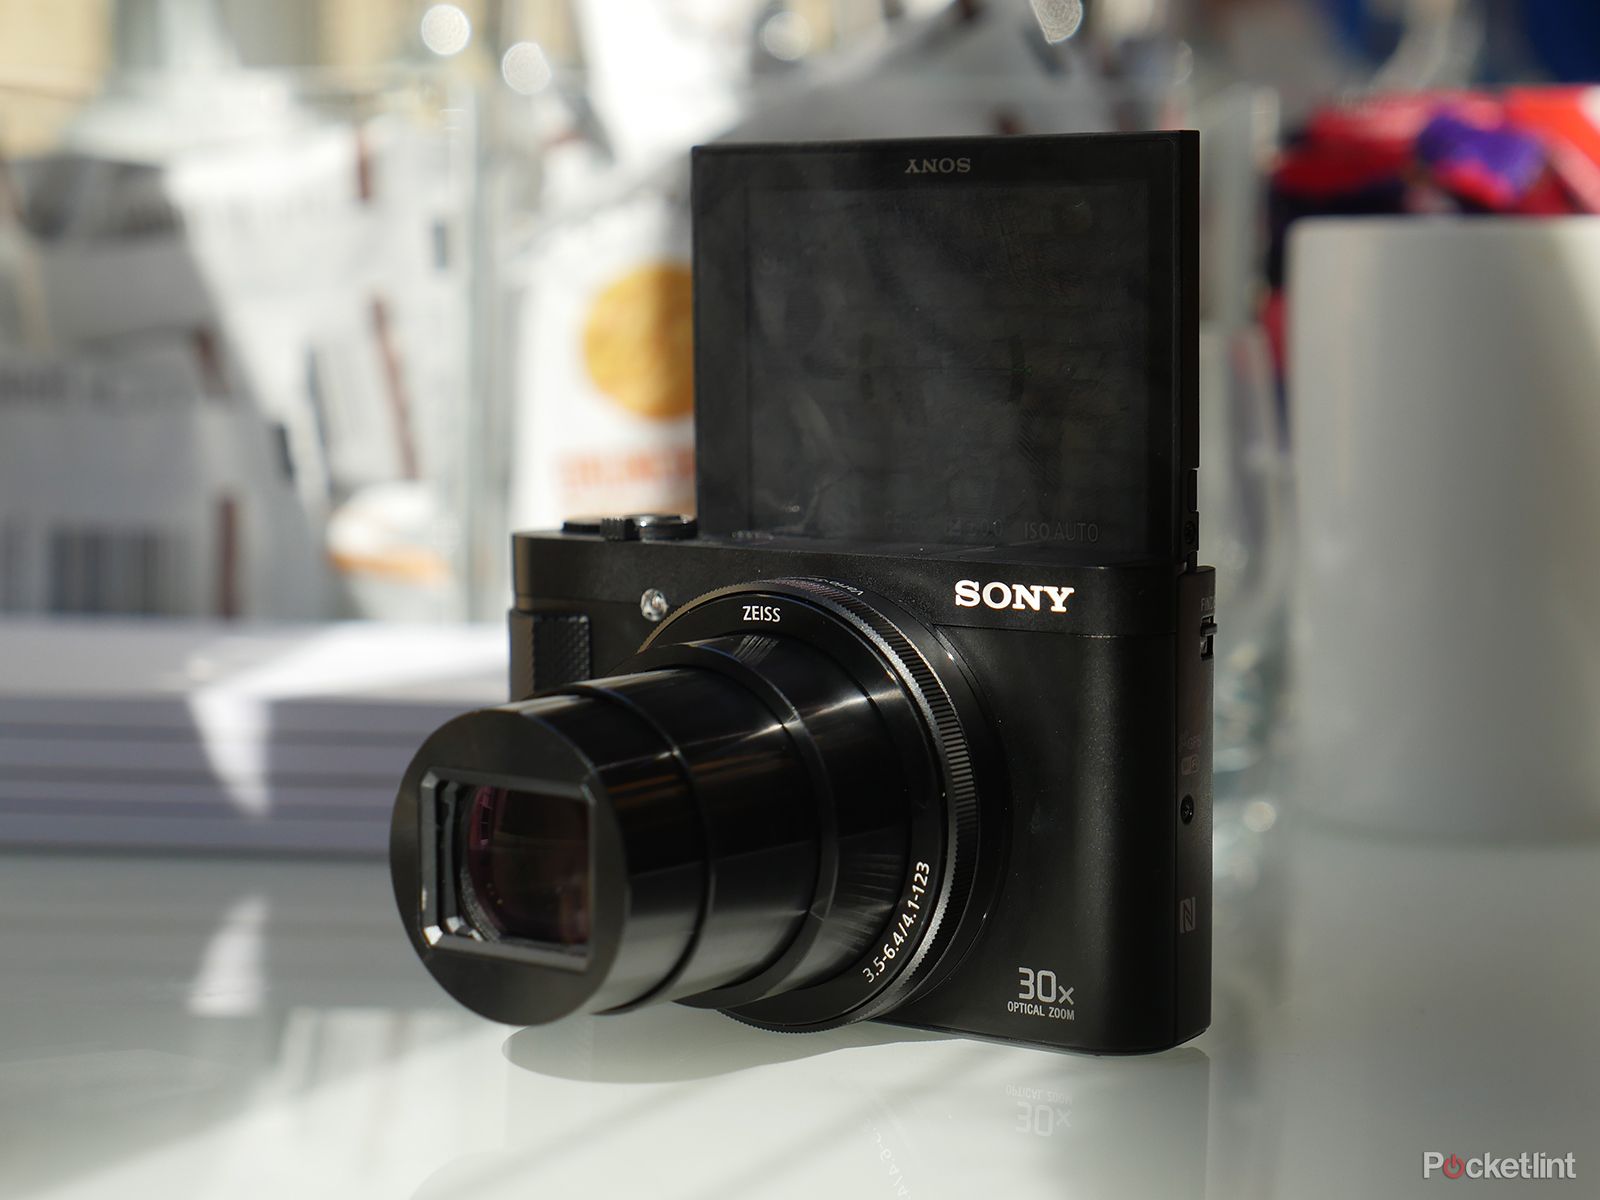 sony cyber shot hx90 review travel compact gives panasonic tz70 something to chew over image 2